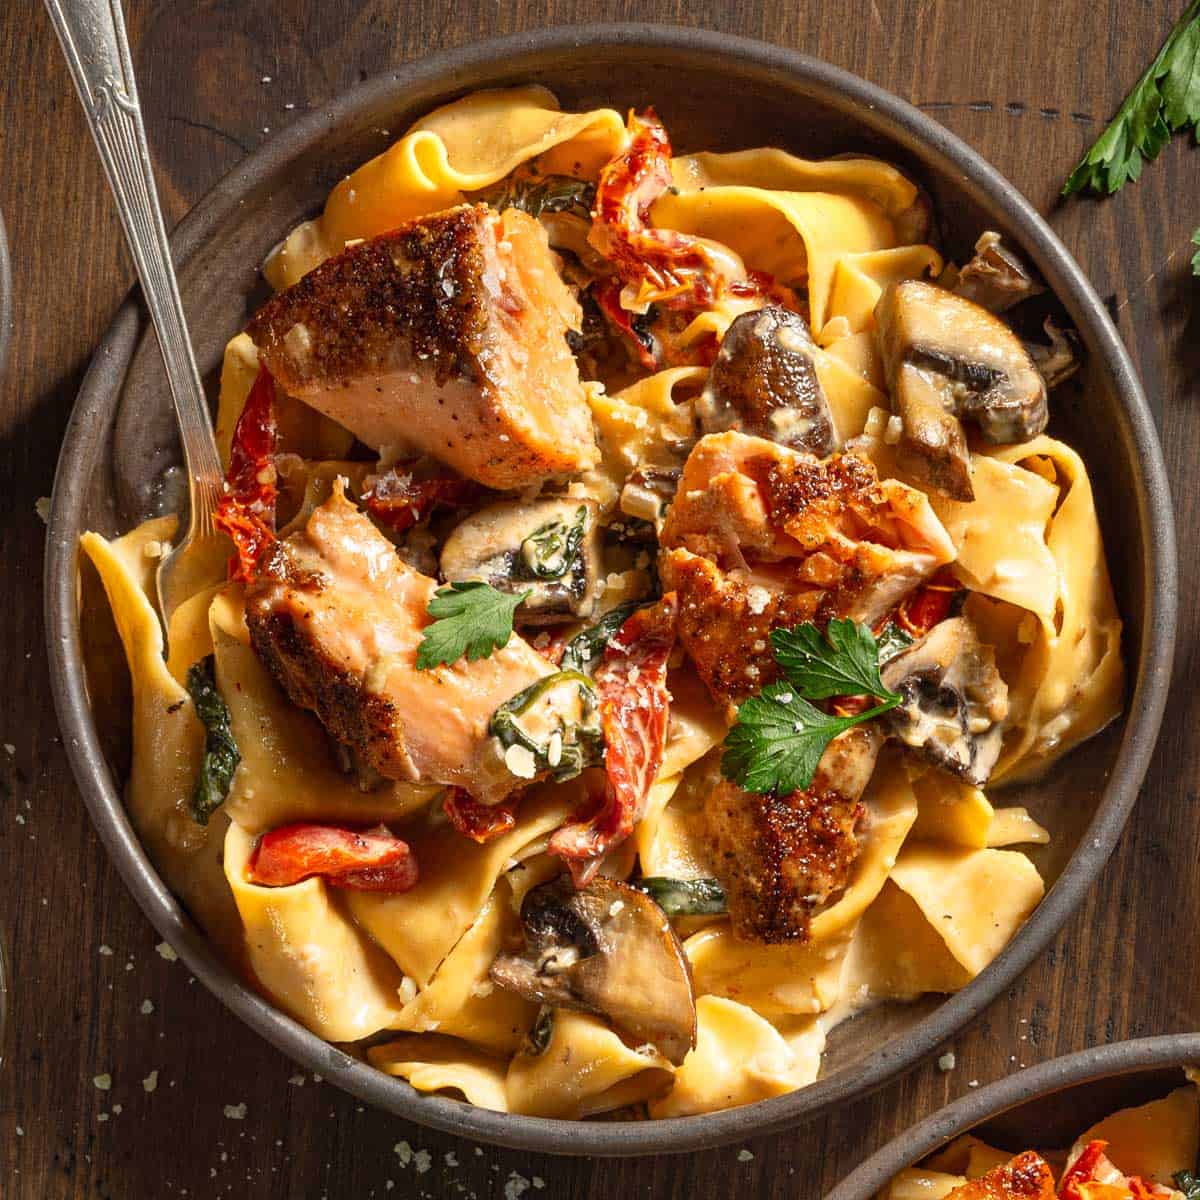 Bowl of creamy cajun salmon alfredo pasta with sun dried tomatoes, red peppers, and mushrooms.